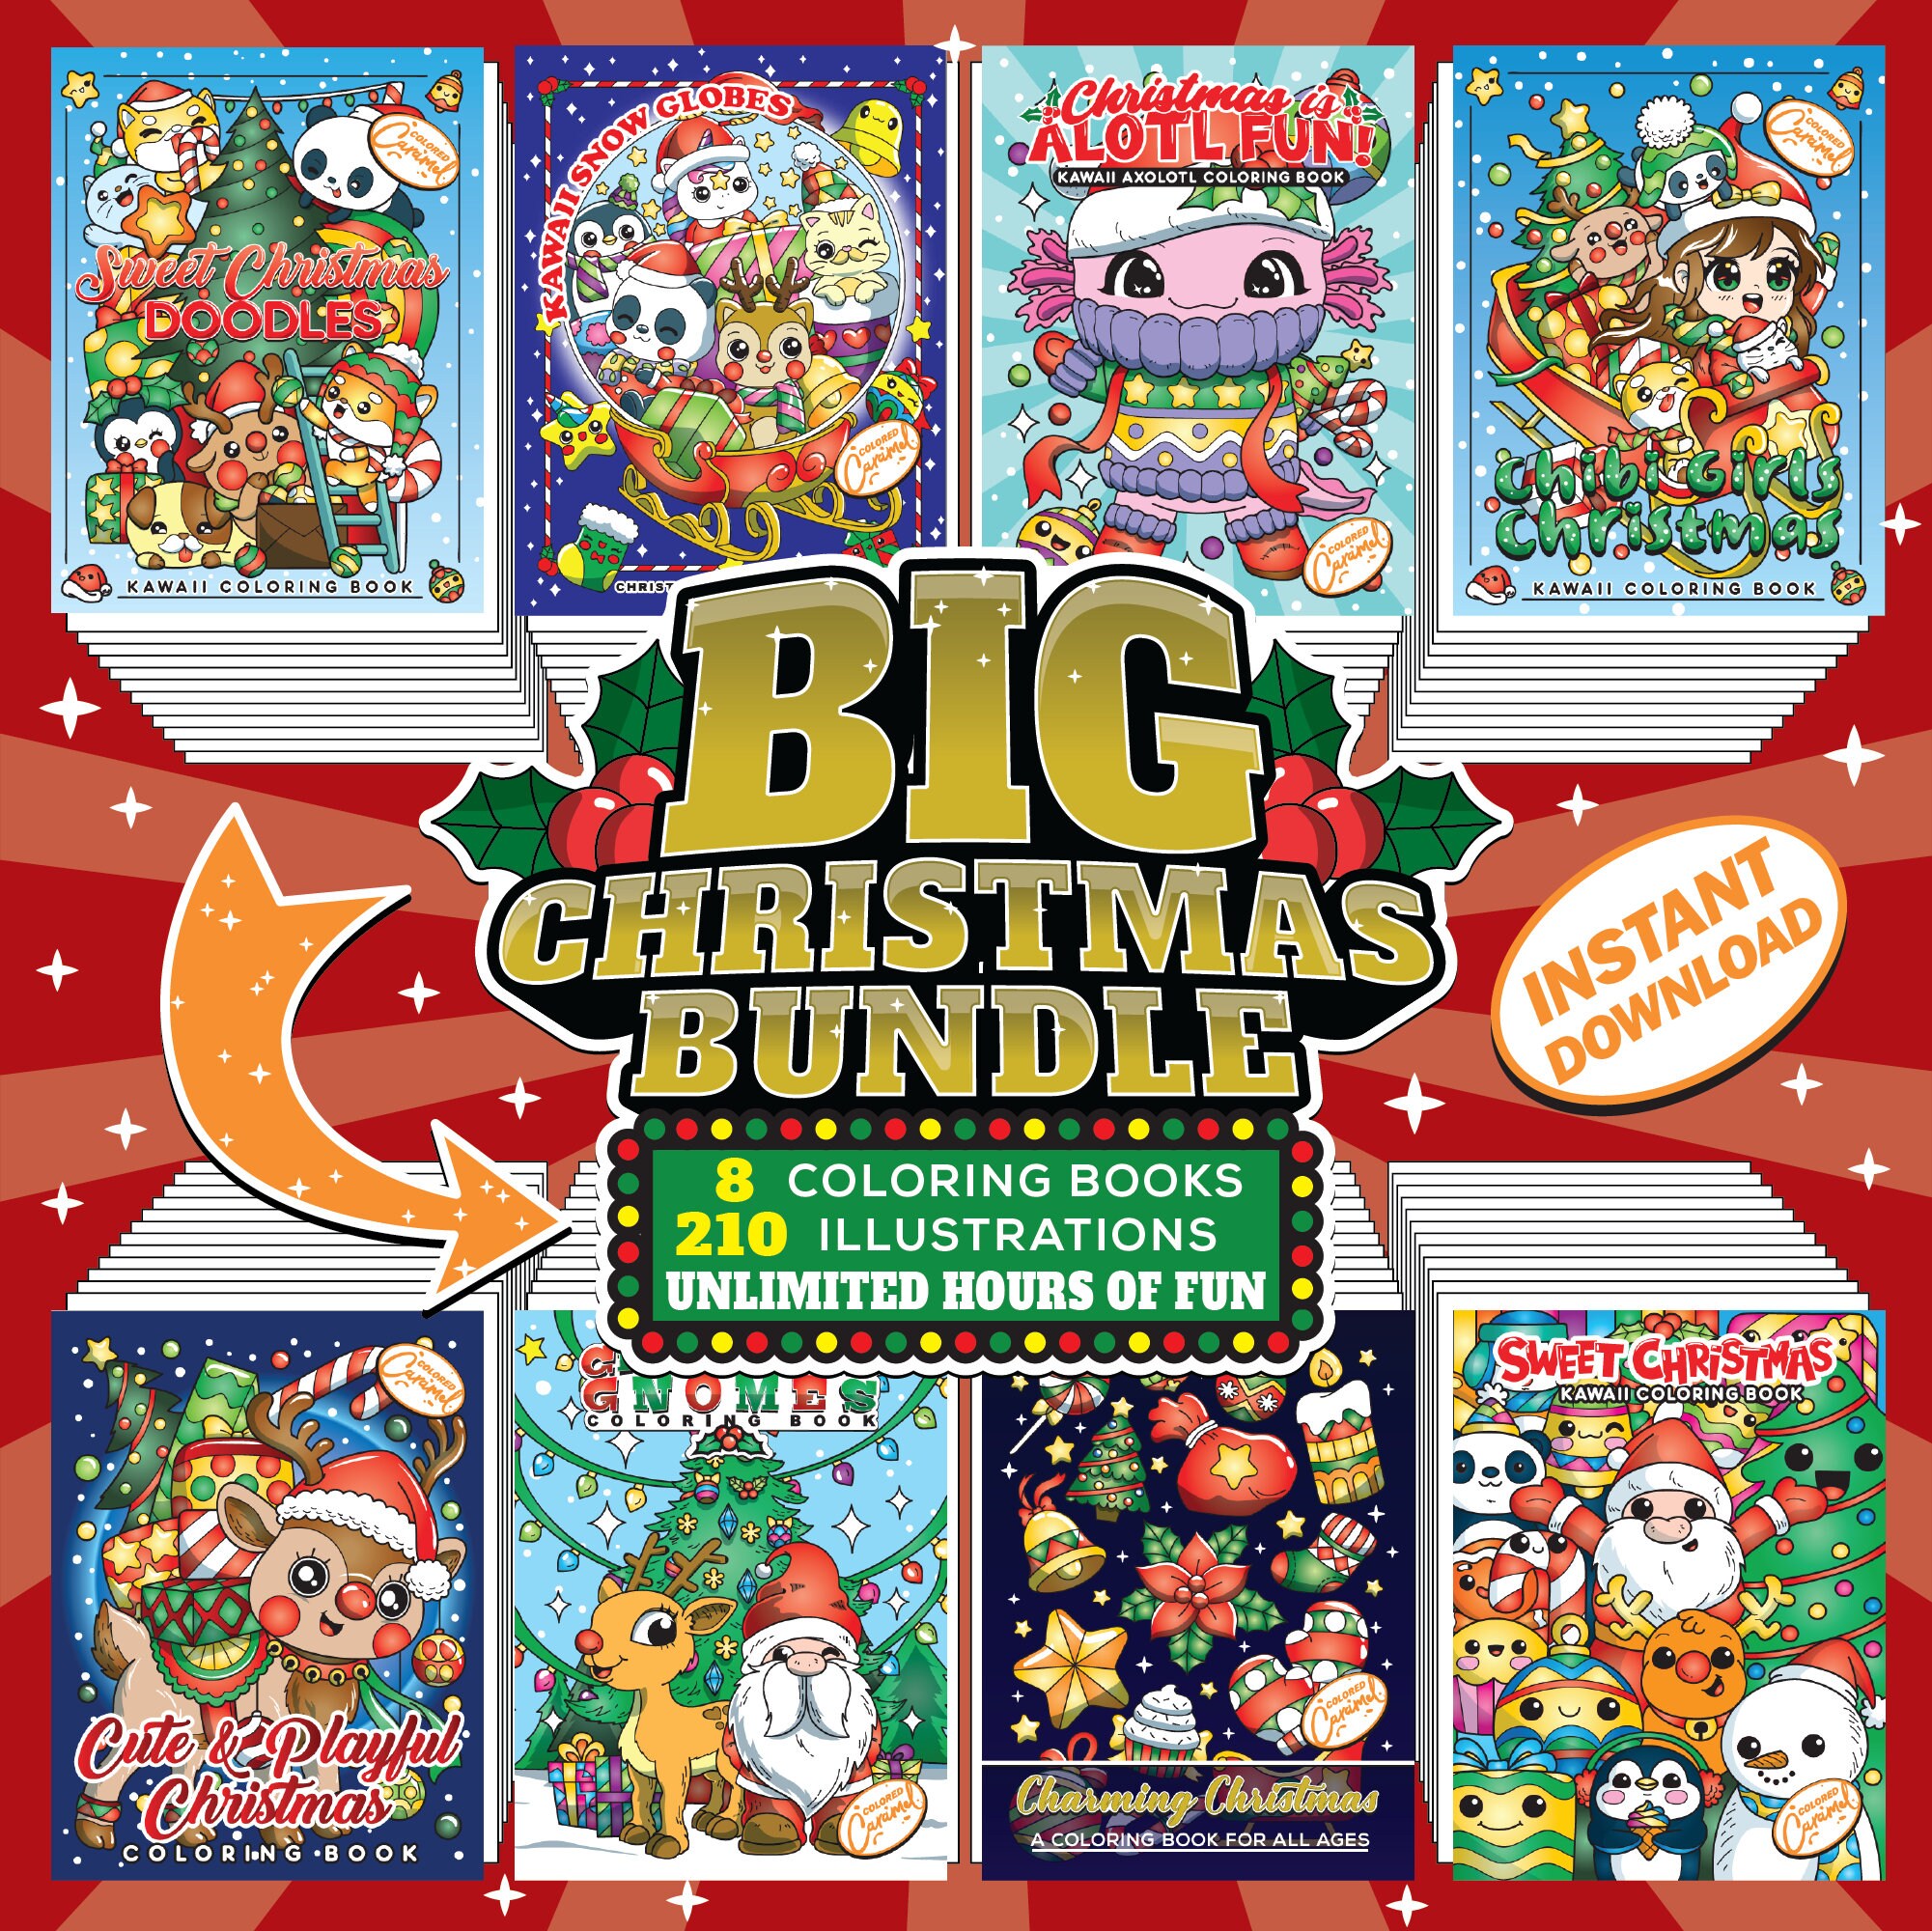 Big Christmas Coloring Books Bundle Pack of 8, Printable Instant Digital Download PDF, Cute Set of 210 Colorable Pages for Adults and Kids